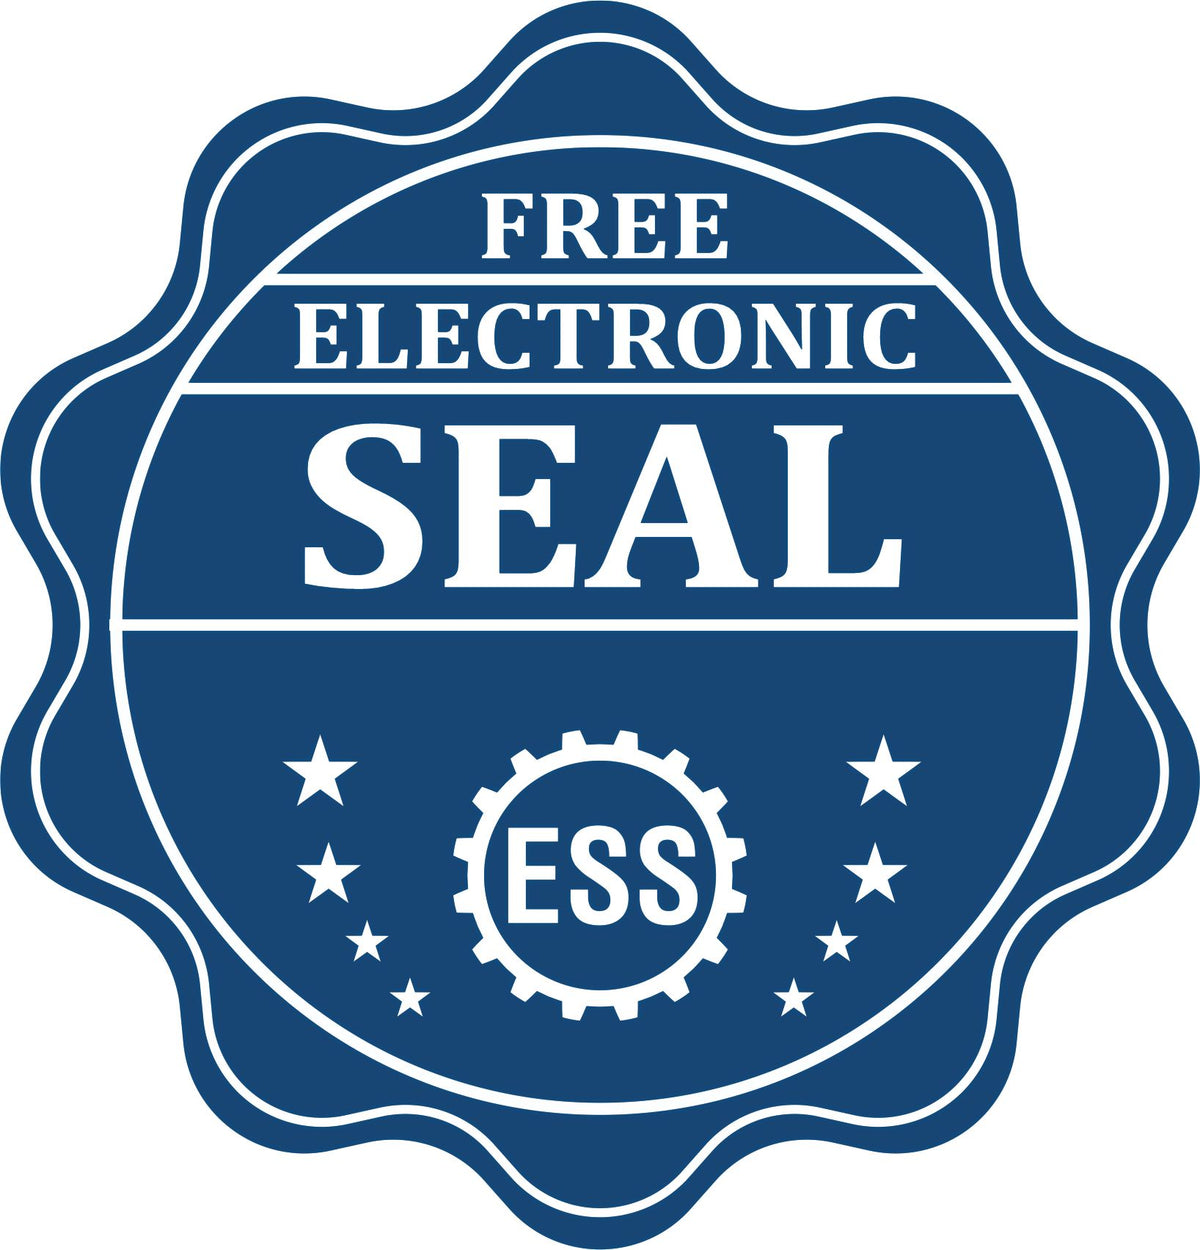 A badge showing a free electronic seal for the Premium MaxLight Pre-Inked Oklahoma Geology Stamp with stars and the ESS gear on the emblem.